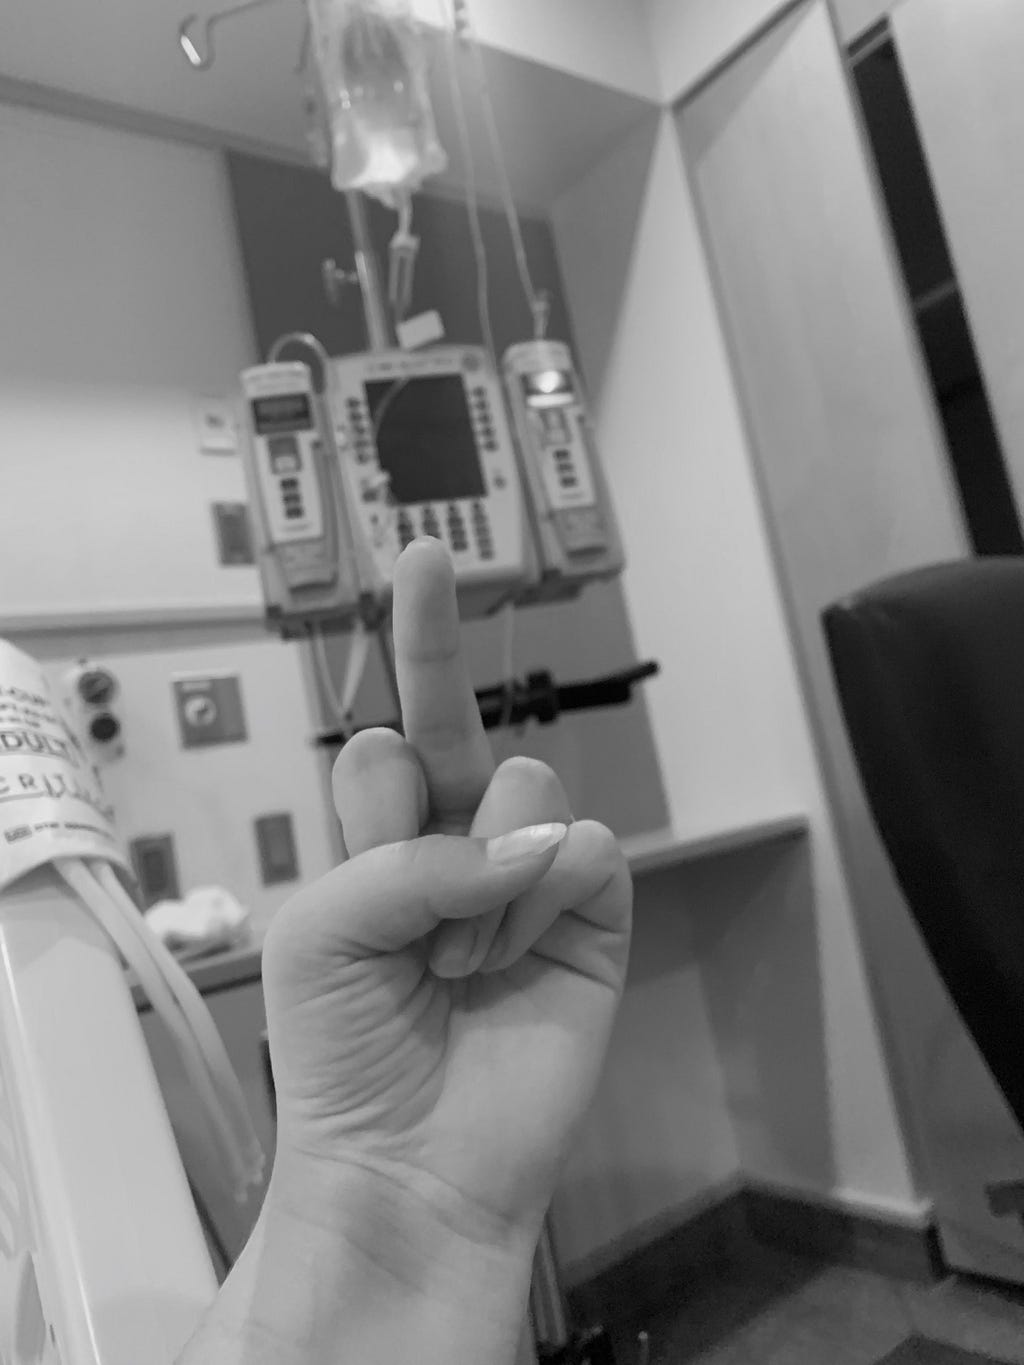 The writer’s hand is at the center focus, flipping off the IV stand behind it next to a hospital bed